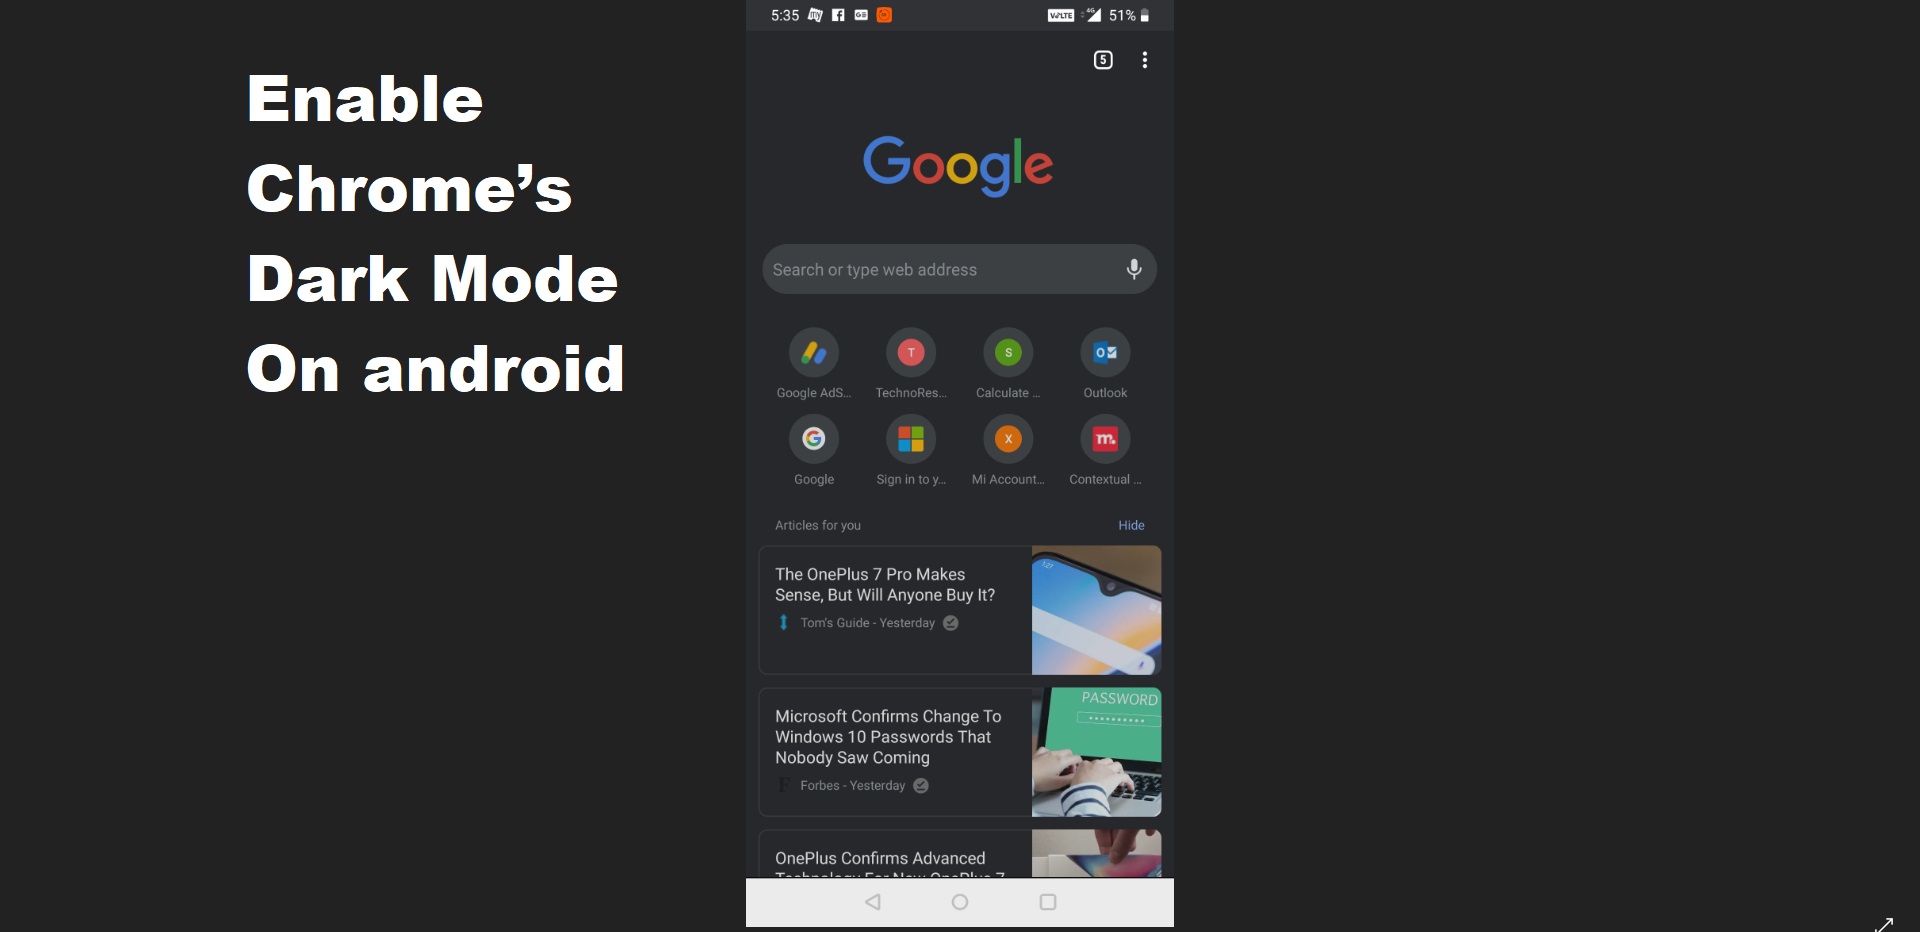 Enable Chrome’s Dark Mode On android